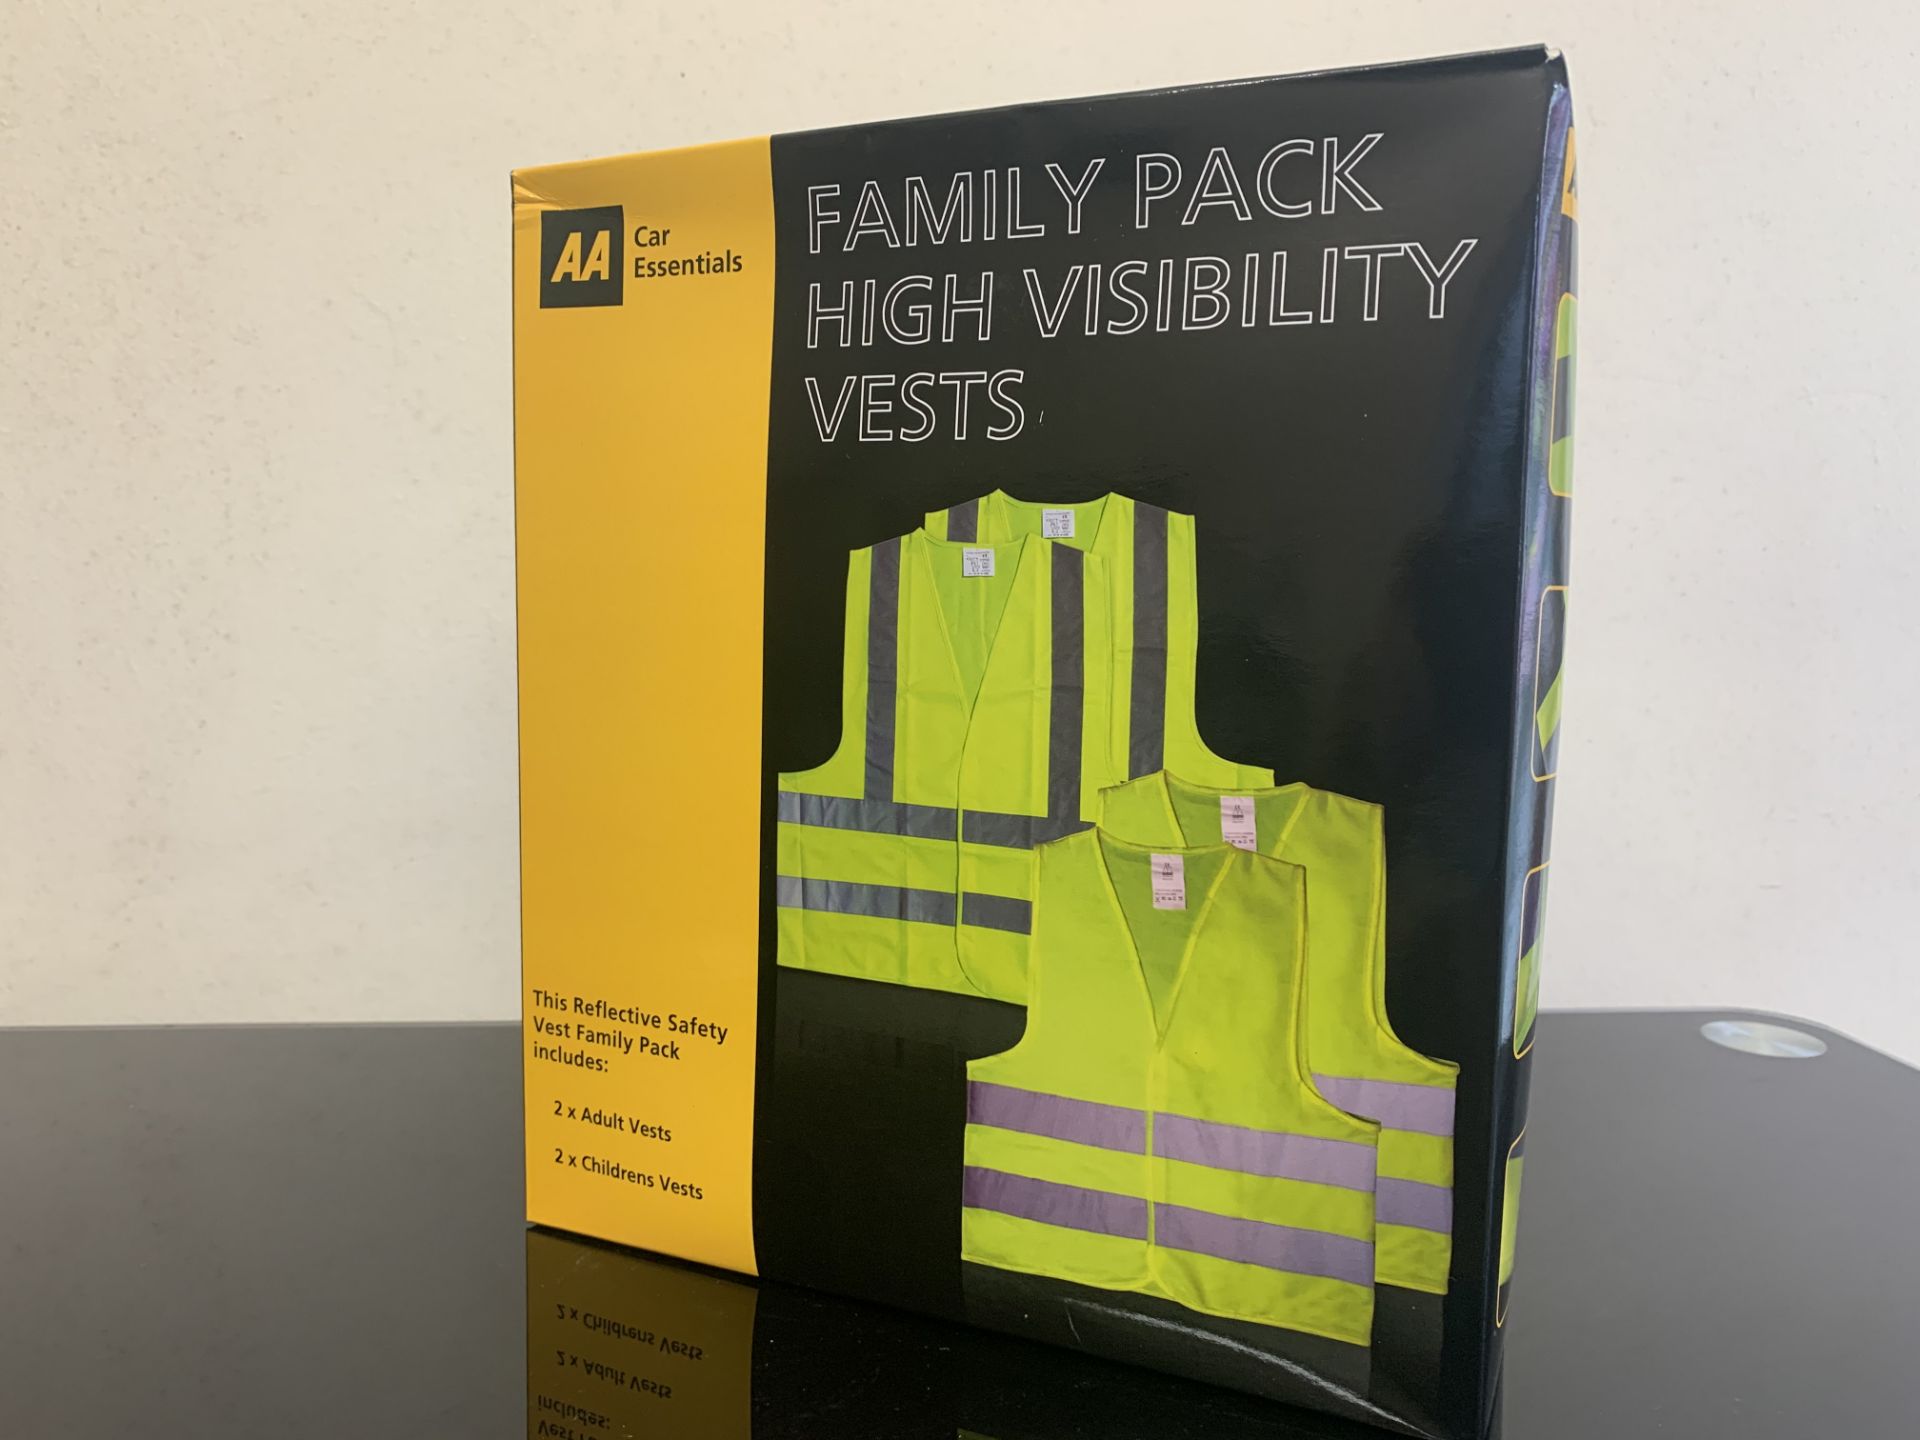 28 X AA CAR ESSENTIALS FAMILY PACK HIGH VISIBILITY VESTS IN 7 BOXES